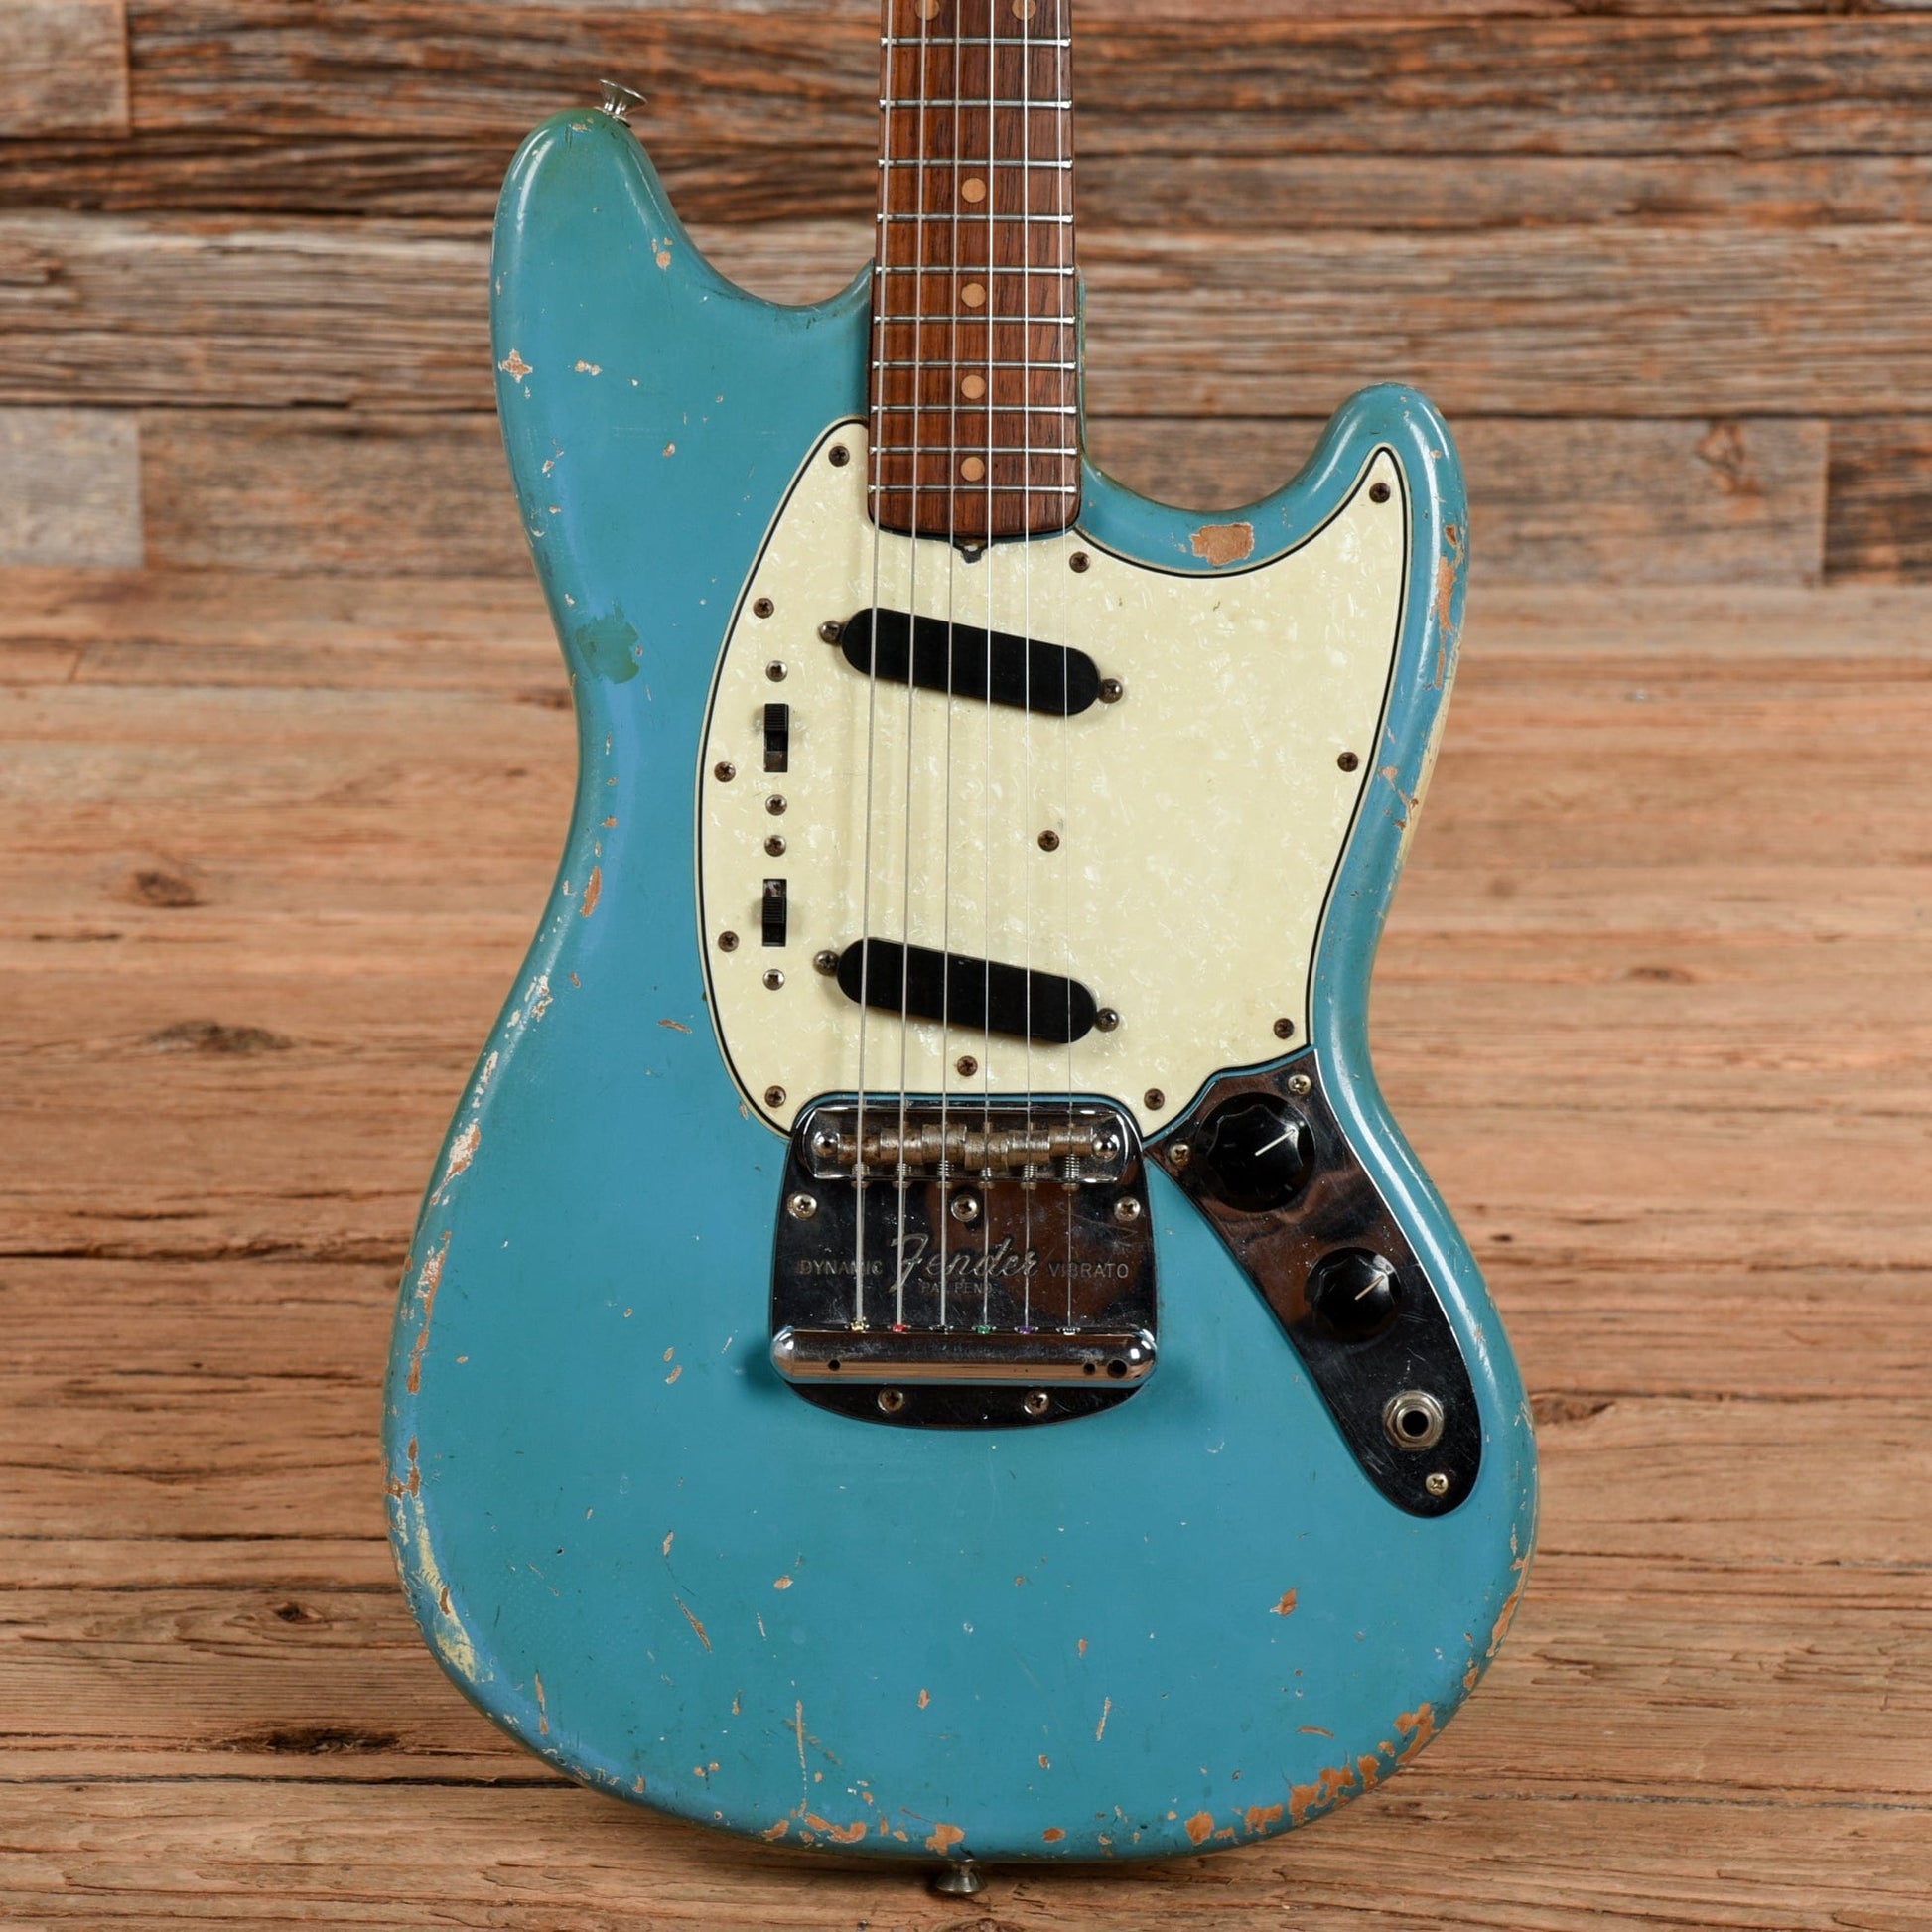 Fender Mustang Daphne Blue 1966 Electric Guitars / Solid Body